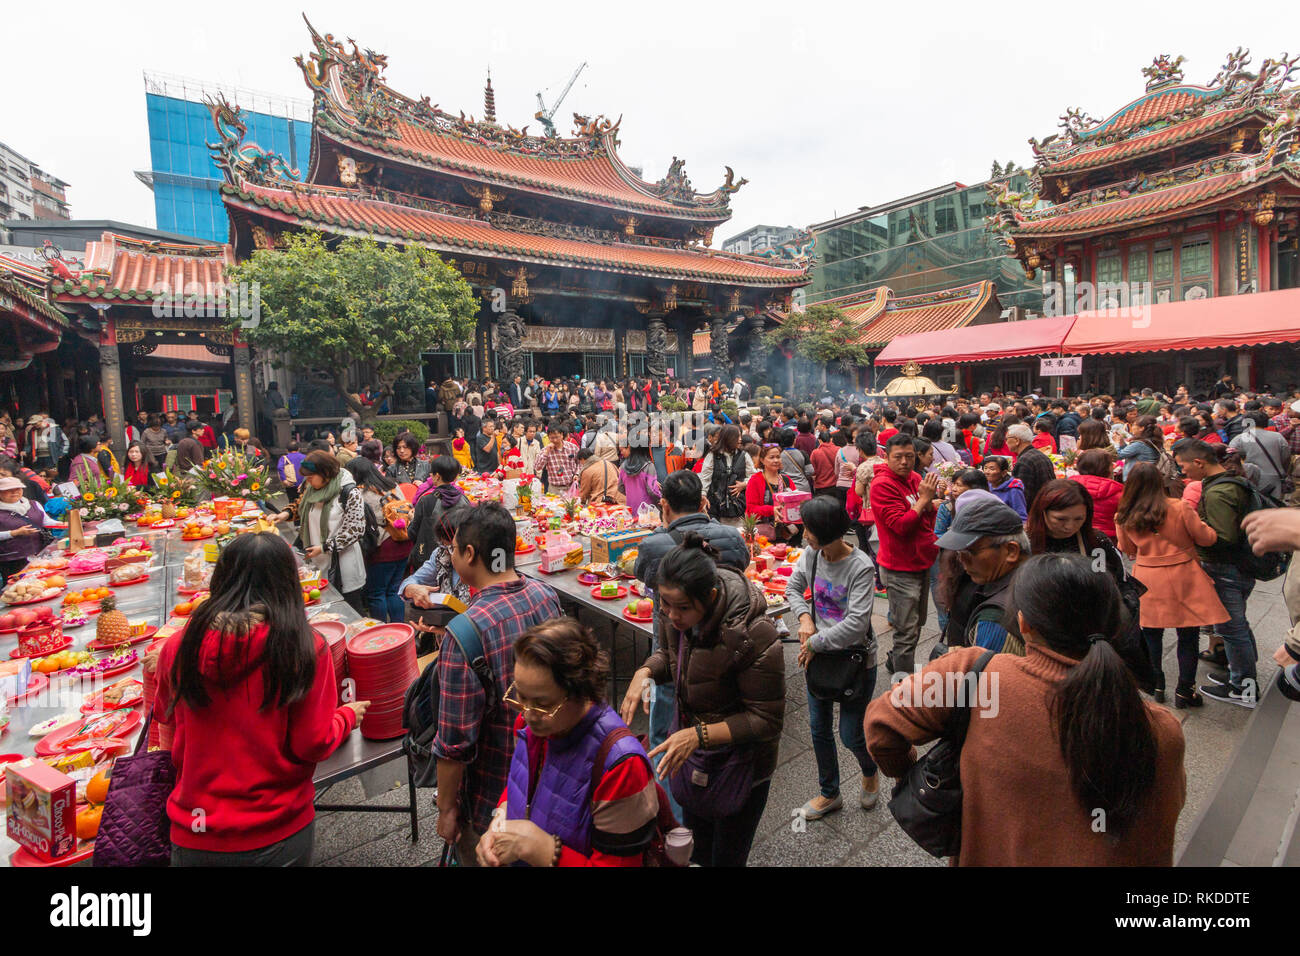 Smoke spreads around Longshan Temple in Taipei on Lunar New Year’s Day as visitors burn incense and pray to mark the arrival of the Year of the pig. Stock Photo